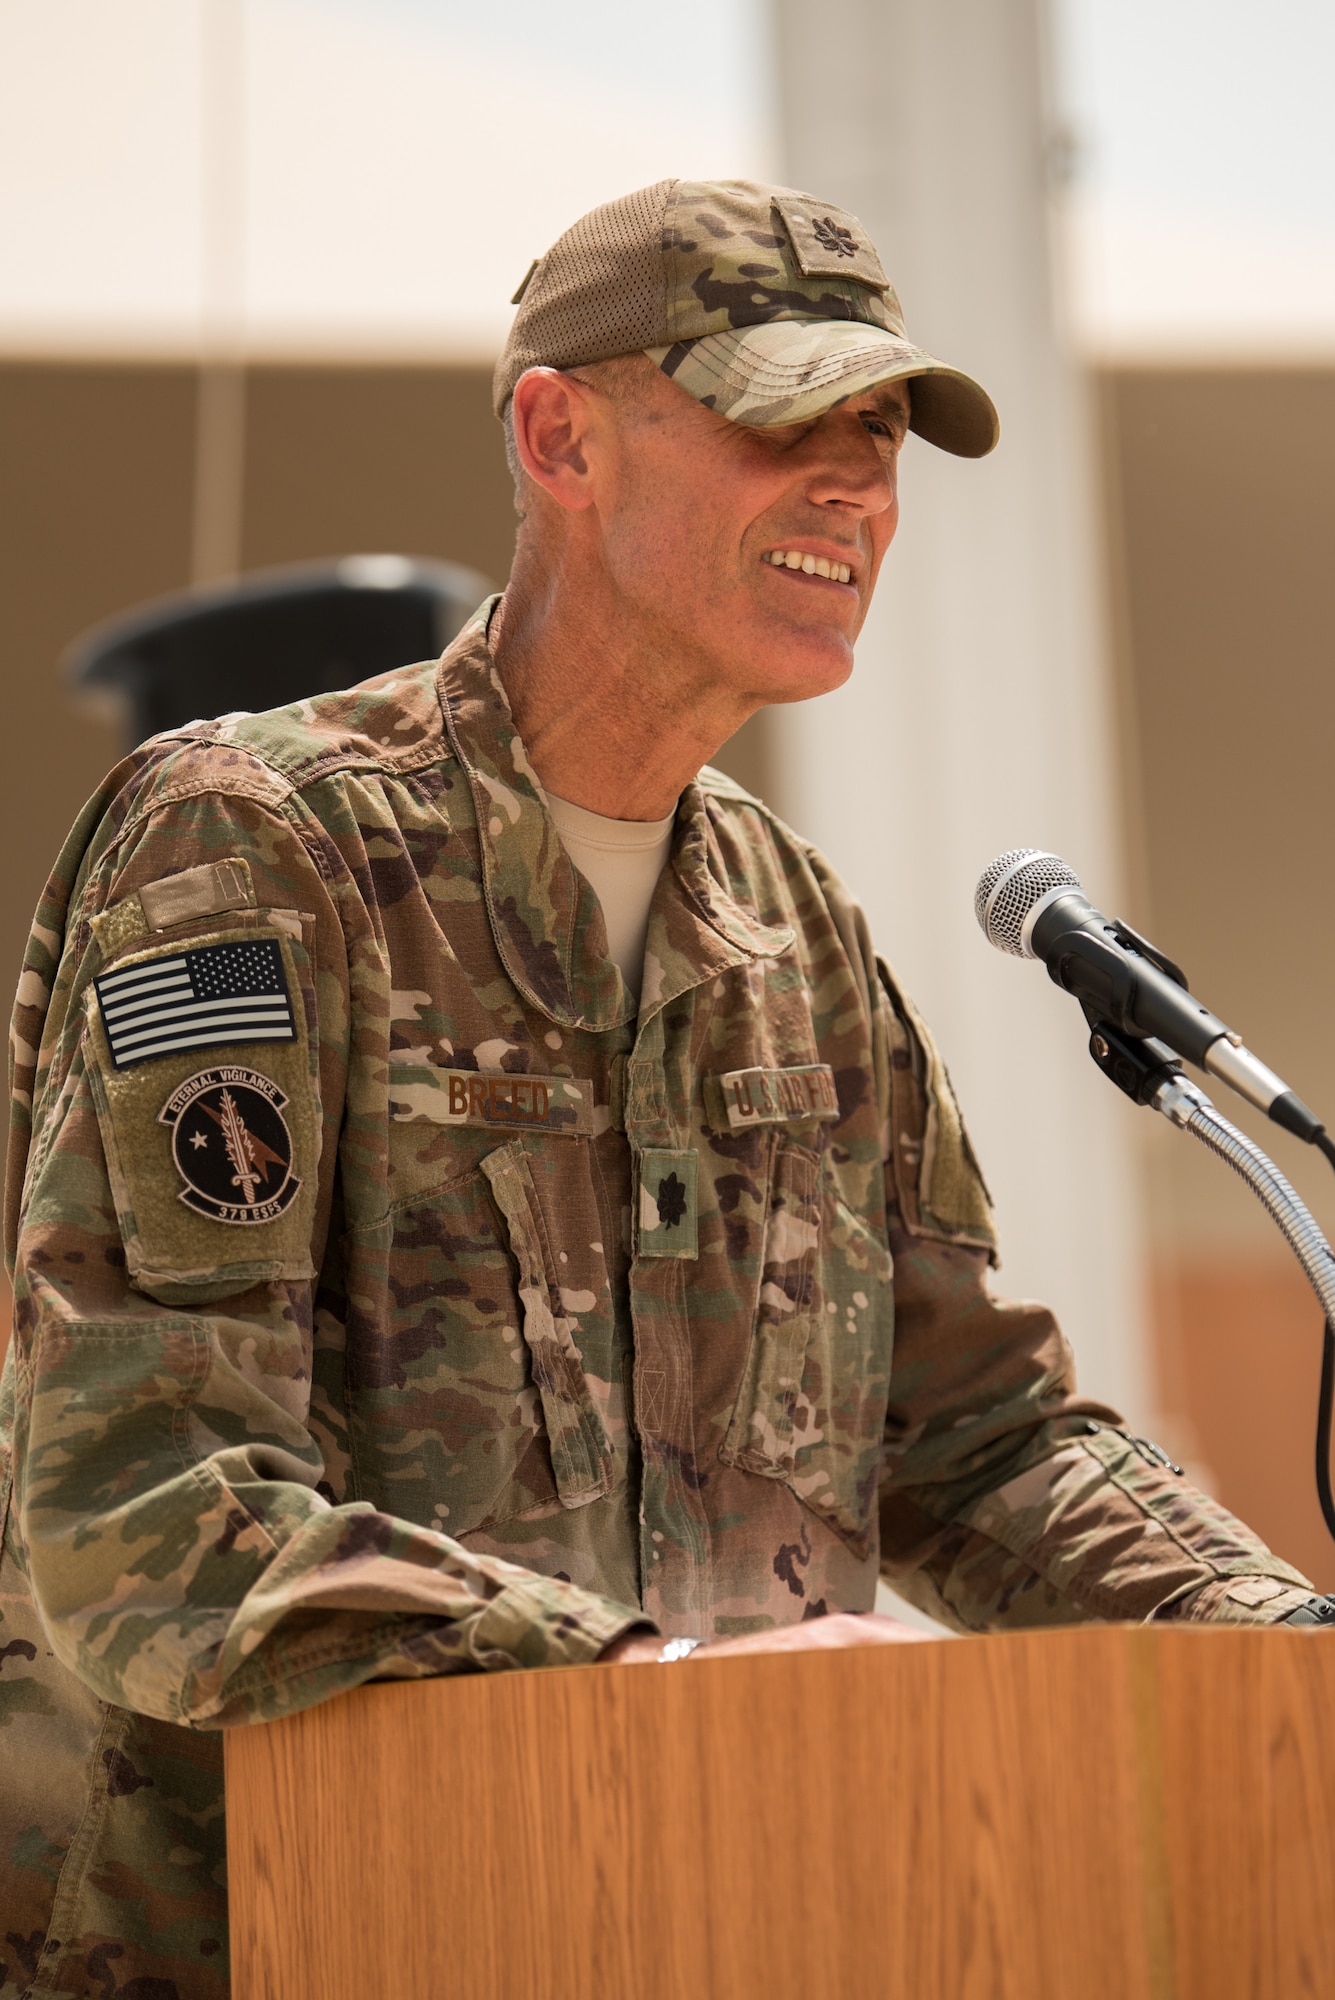 Lt. Col. Mark W. Breed, commander of the 379th Expeditionary Security Forces Squadron, addresses the crowd during a fallen defender memorial ceremony at Al Udeid Air Base, Qatar, May 18, 2018. The ceremony, taking place during National Police Week 2018, was one of the week’s many events in addition to a 24-hour remembrance walk, a law enforcement tactics demonstration, a military working dog competition and a 5K ruck. (U.S. Air Force Photo by Staff Sgt. Joshua Horton)